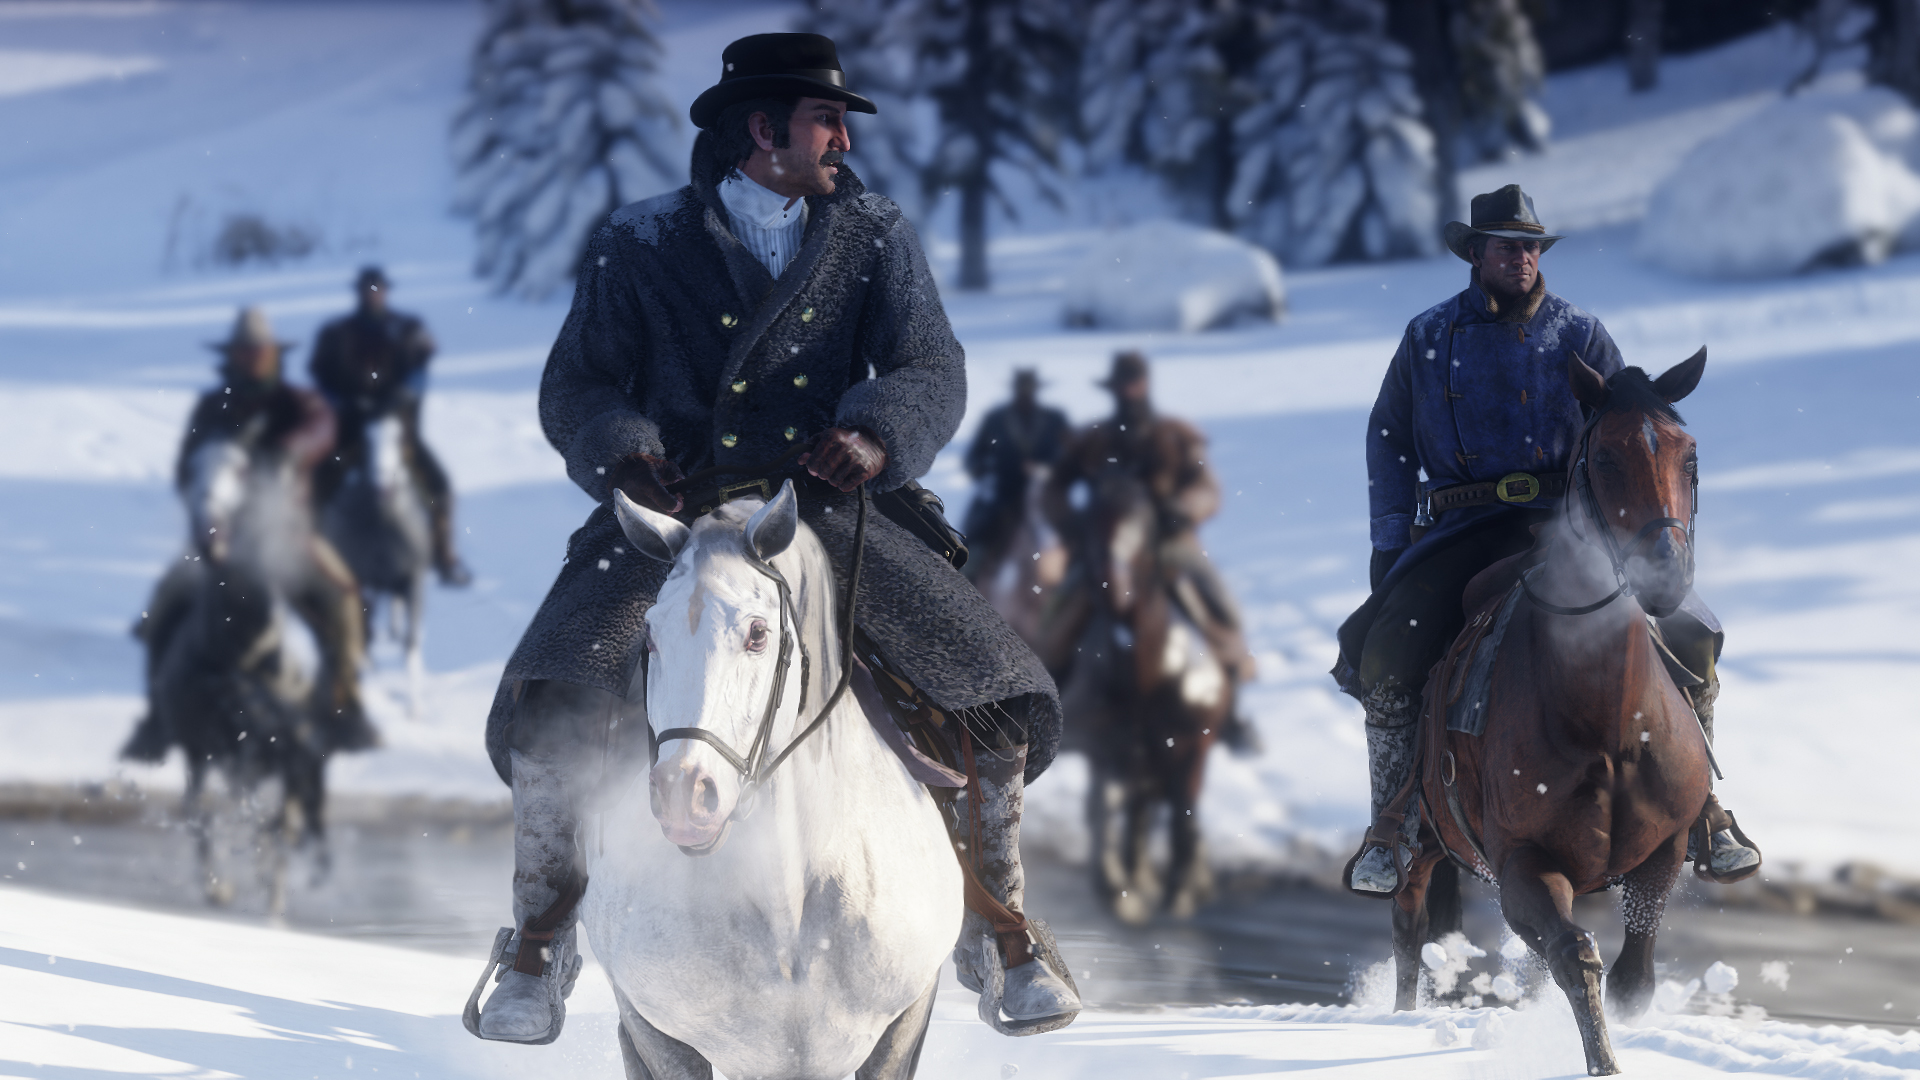 PSN Deals: Hundreds of Top PS4, PSVR Games Reduced; Red Dead Redemption 2, Star Wars Jedi: Fallen Order, The Outer Worlds and More (UK/EU)